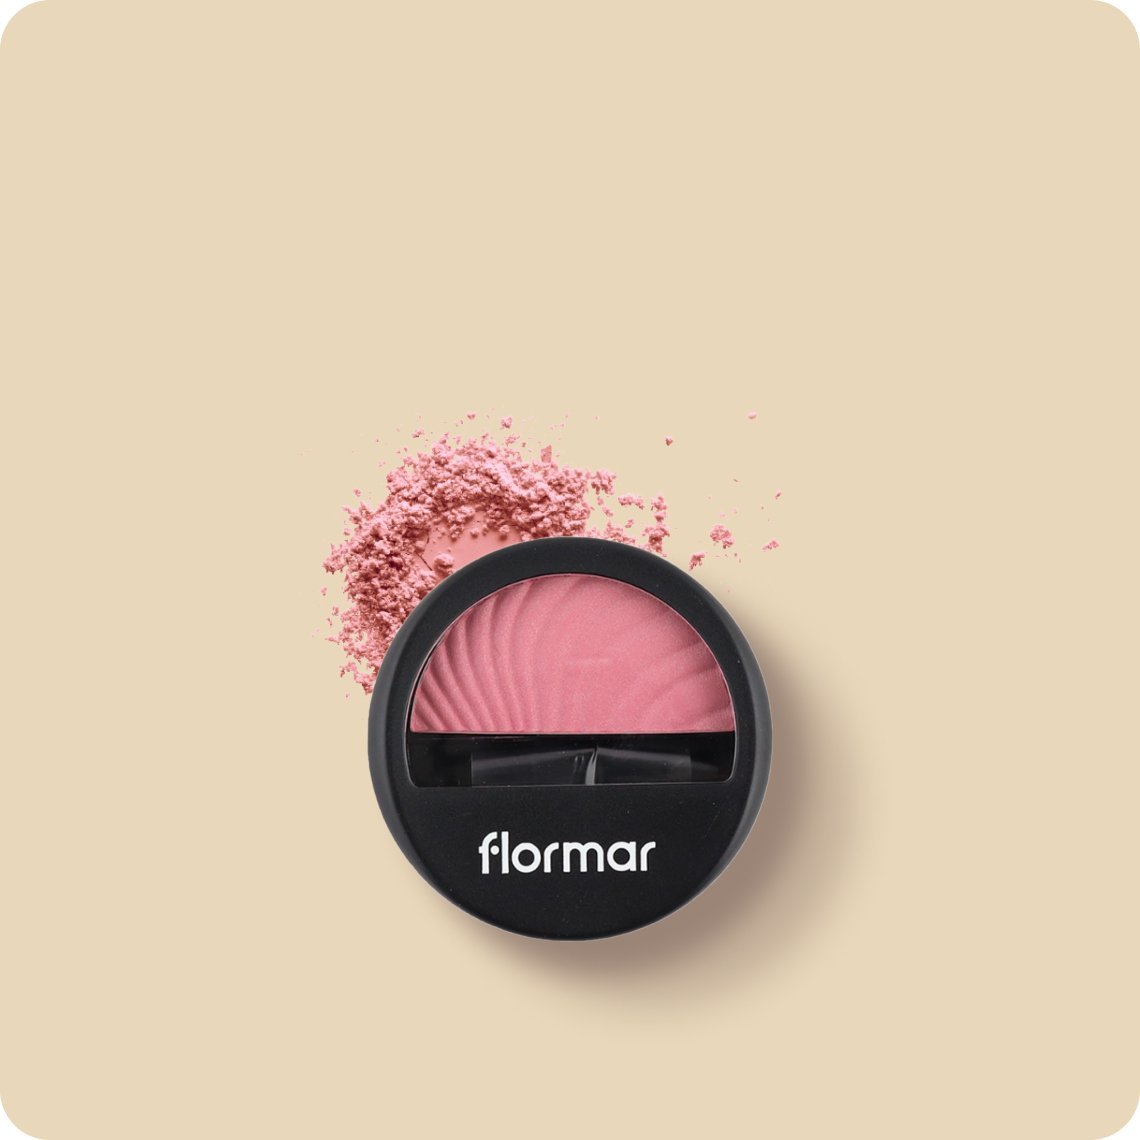 Flormar Malta - Shop online and get up to 30% OFF SHOP NOW:   Flormar Matte Touch Foundation for its light  structure and mattifying feature that takes away the shining on the